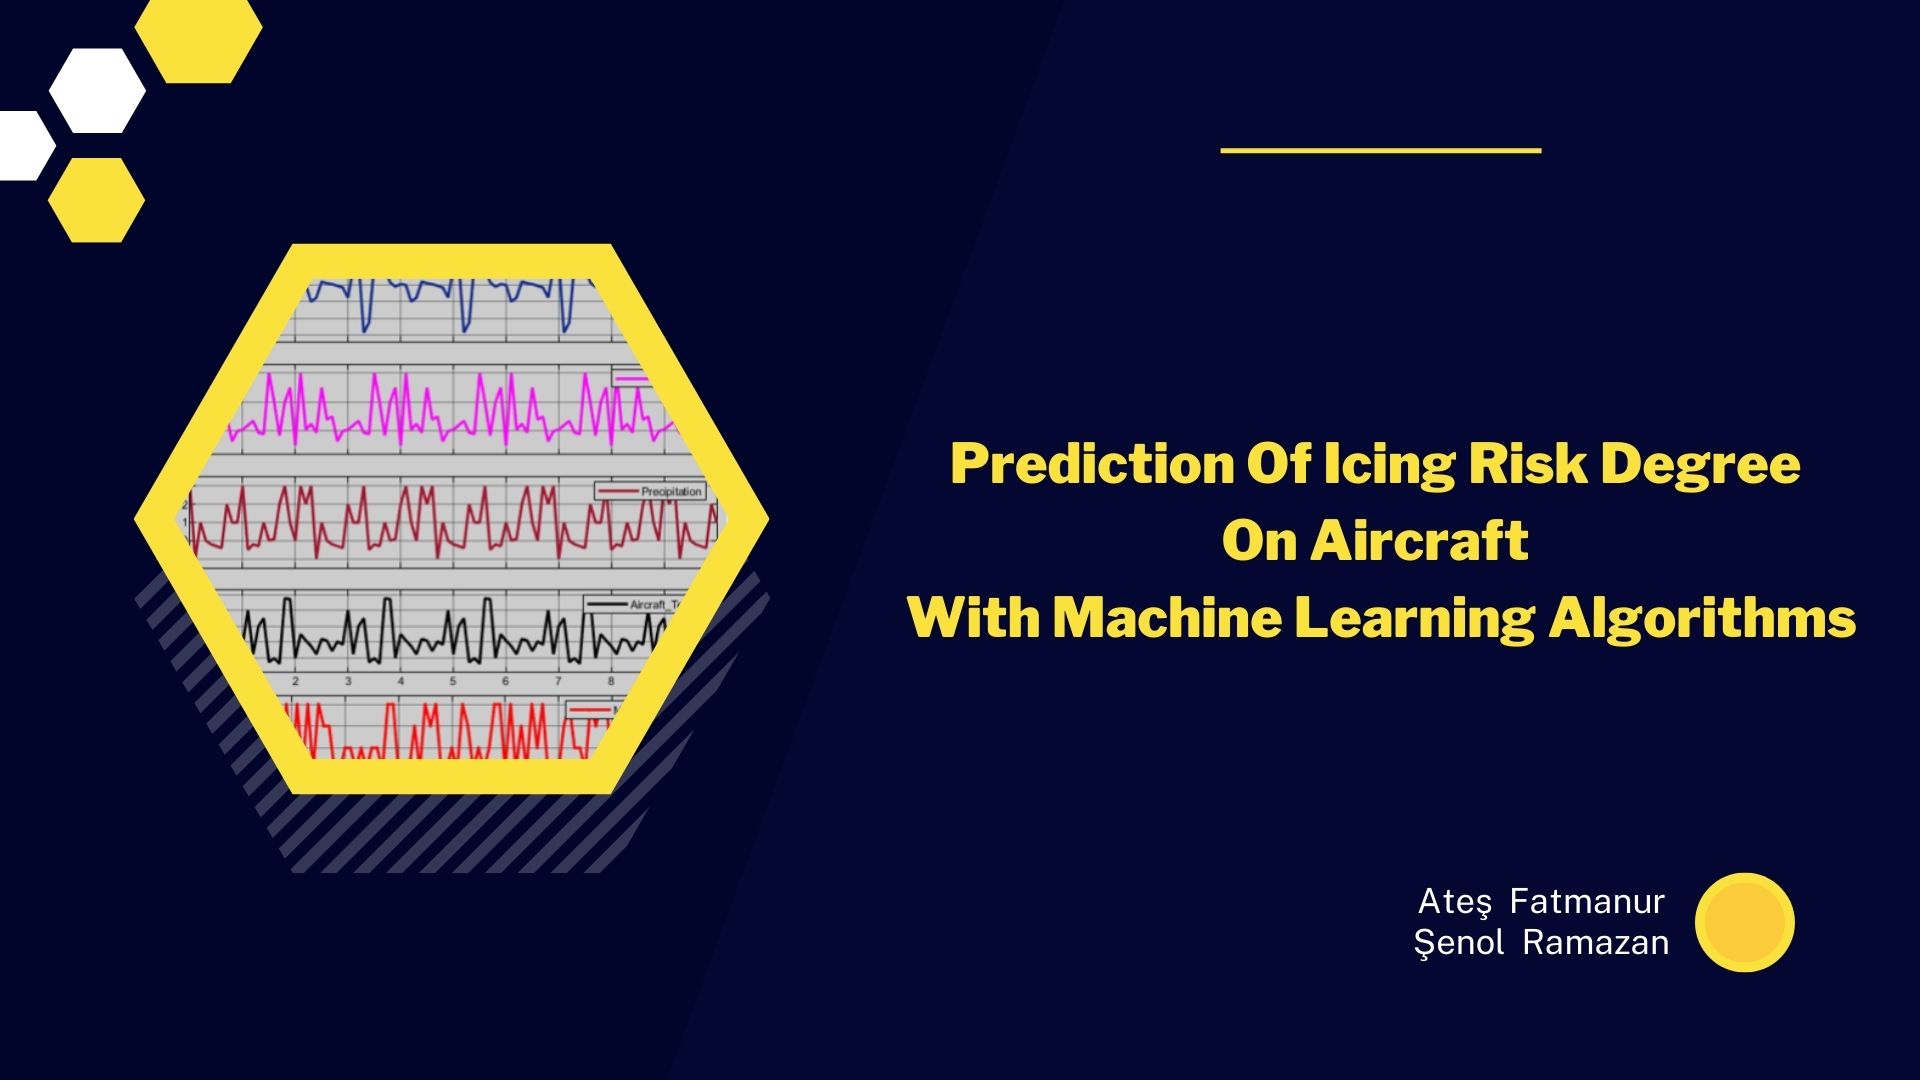 Prediction Of Icing Risk Degree On Aircraft With Machine Learning Algorithms